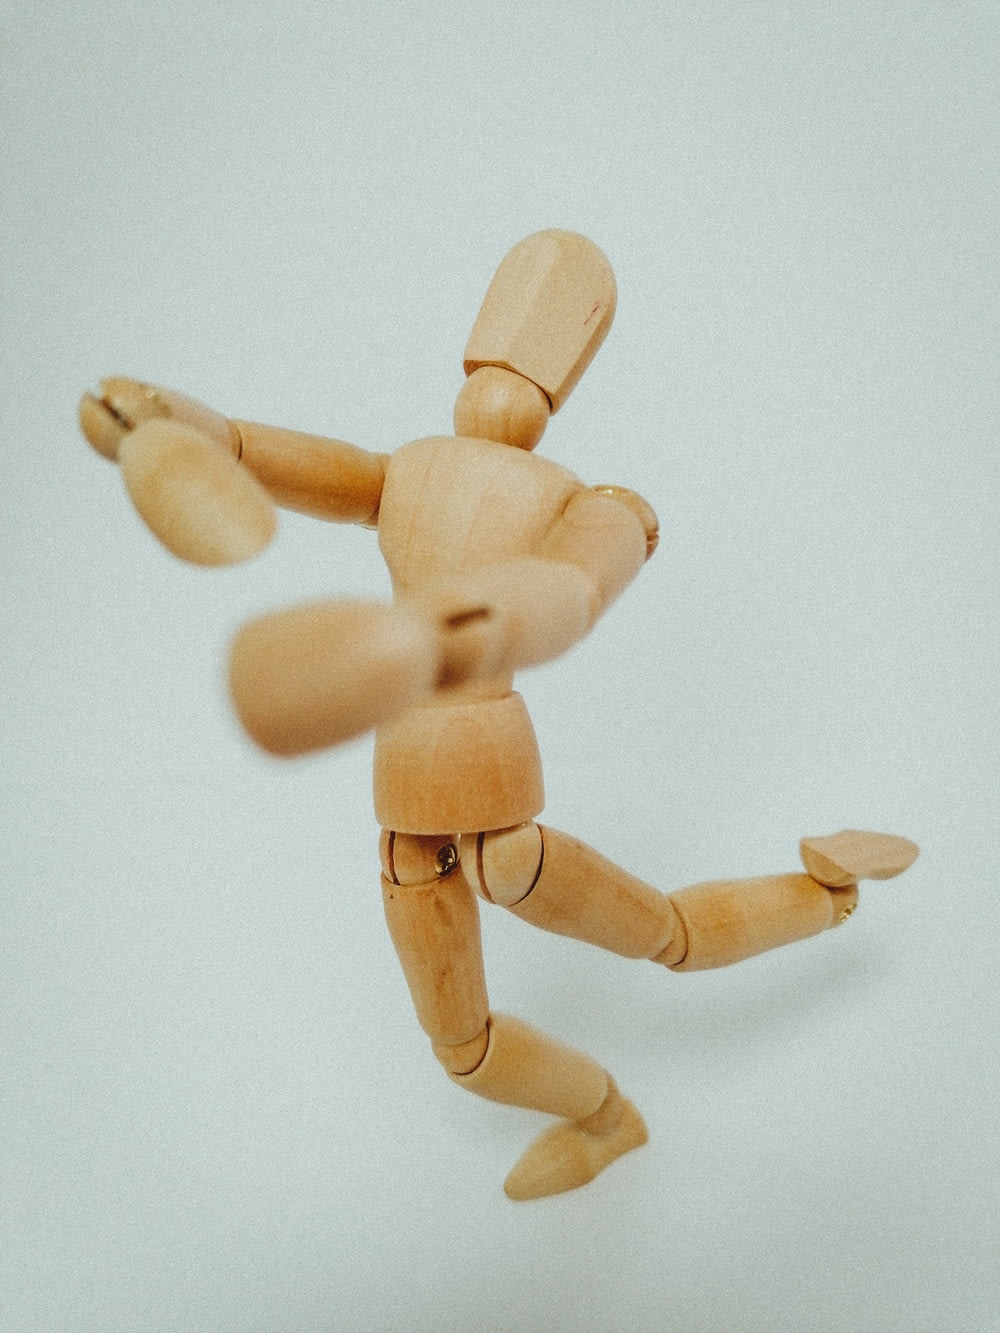 brown wooden human figure on white surface